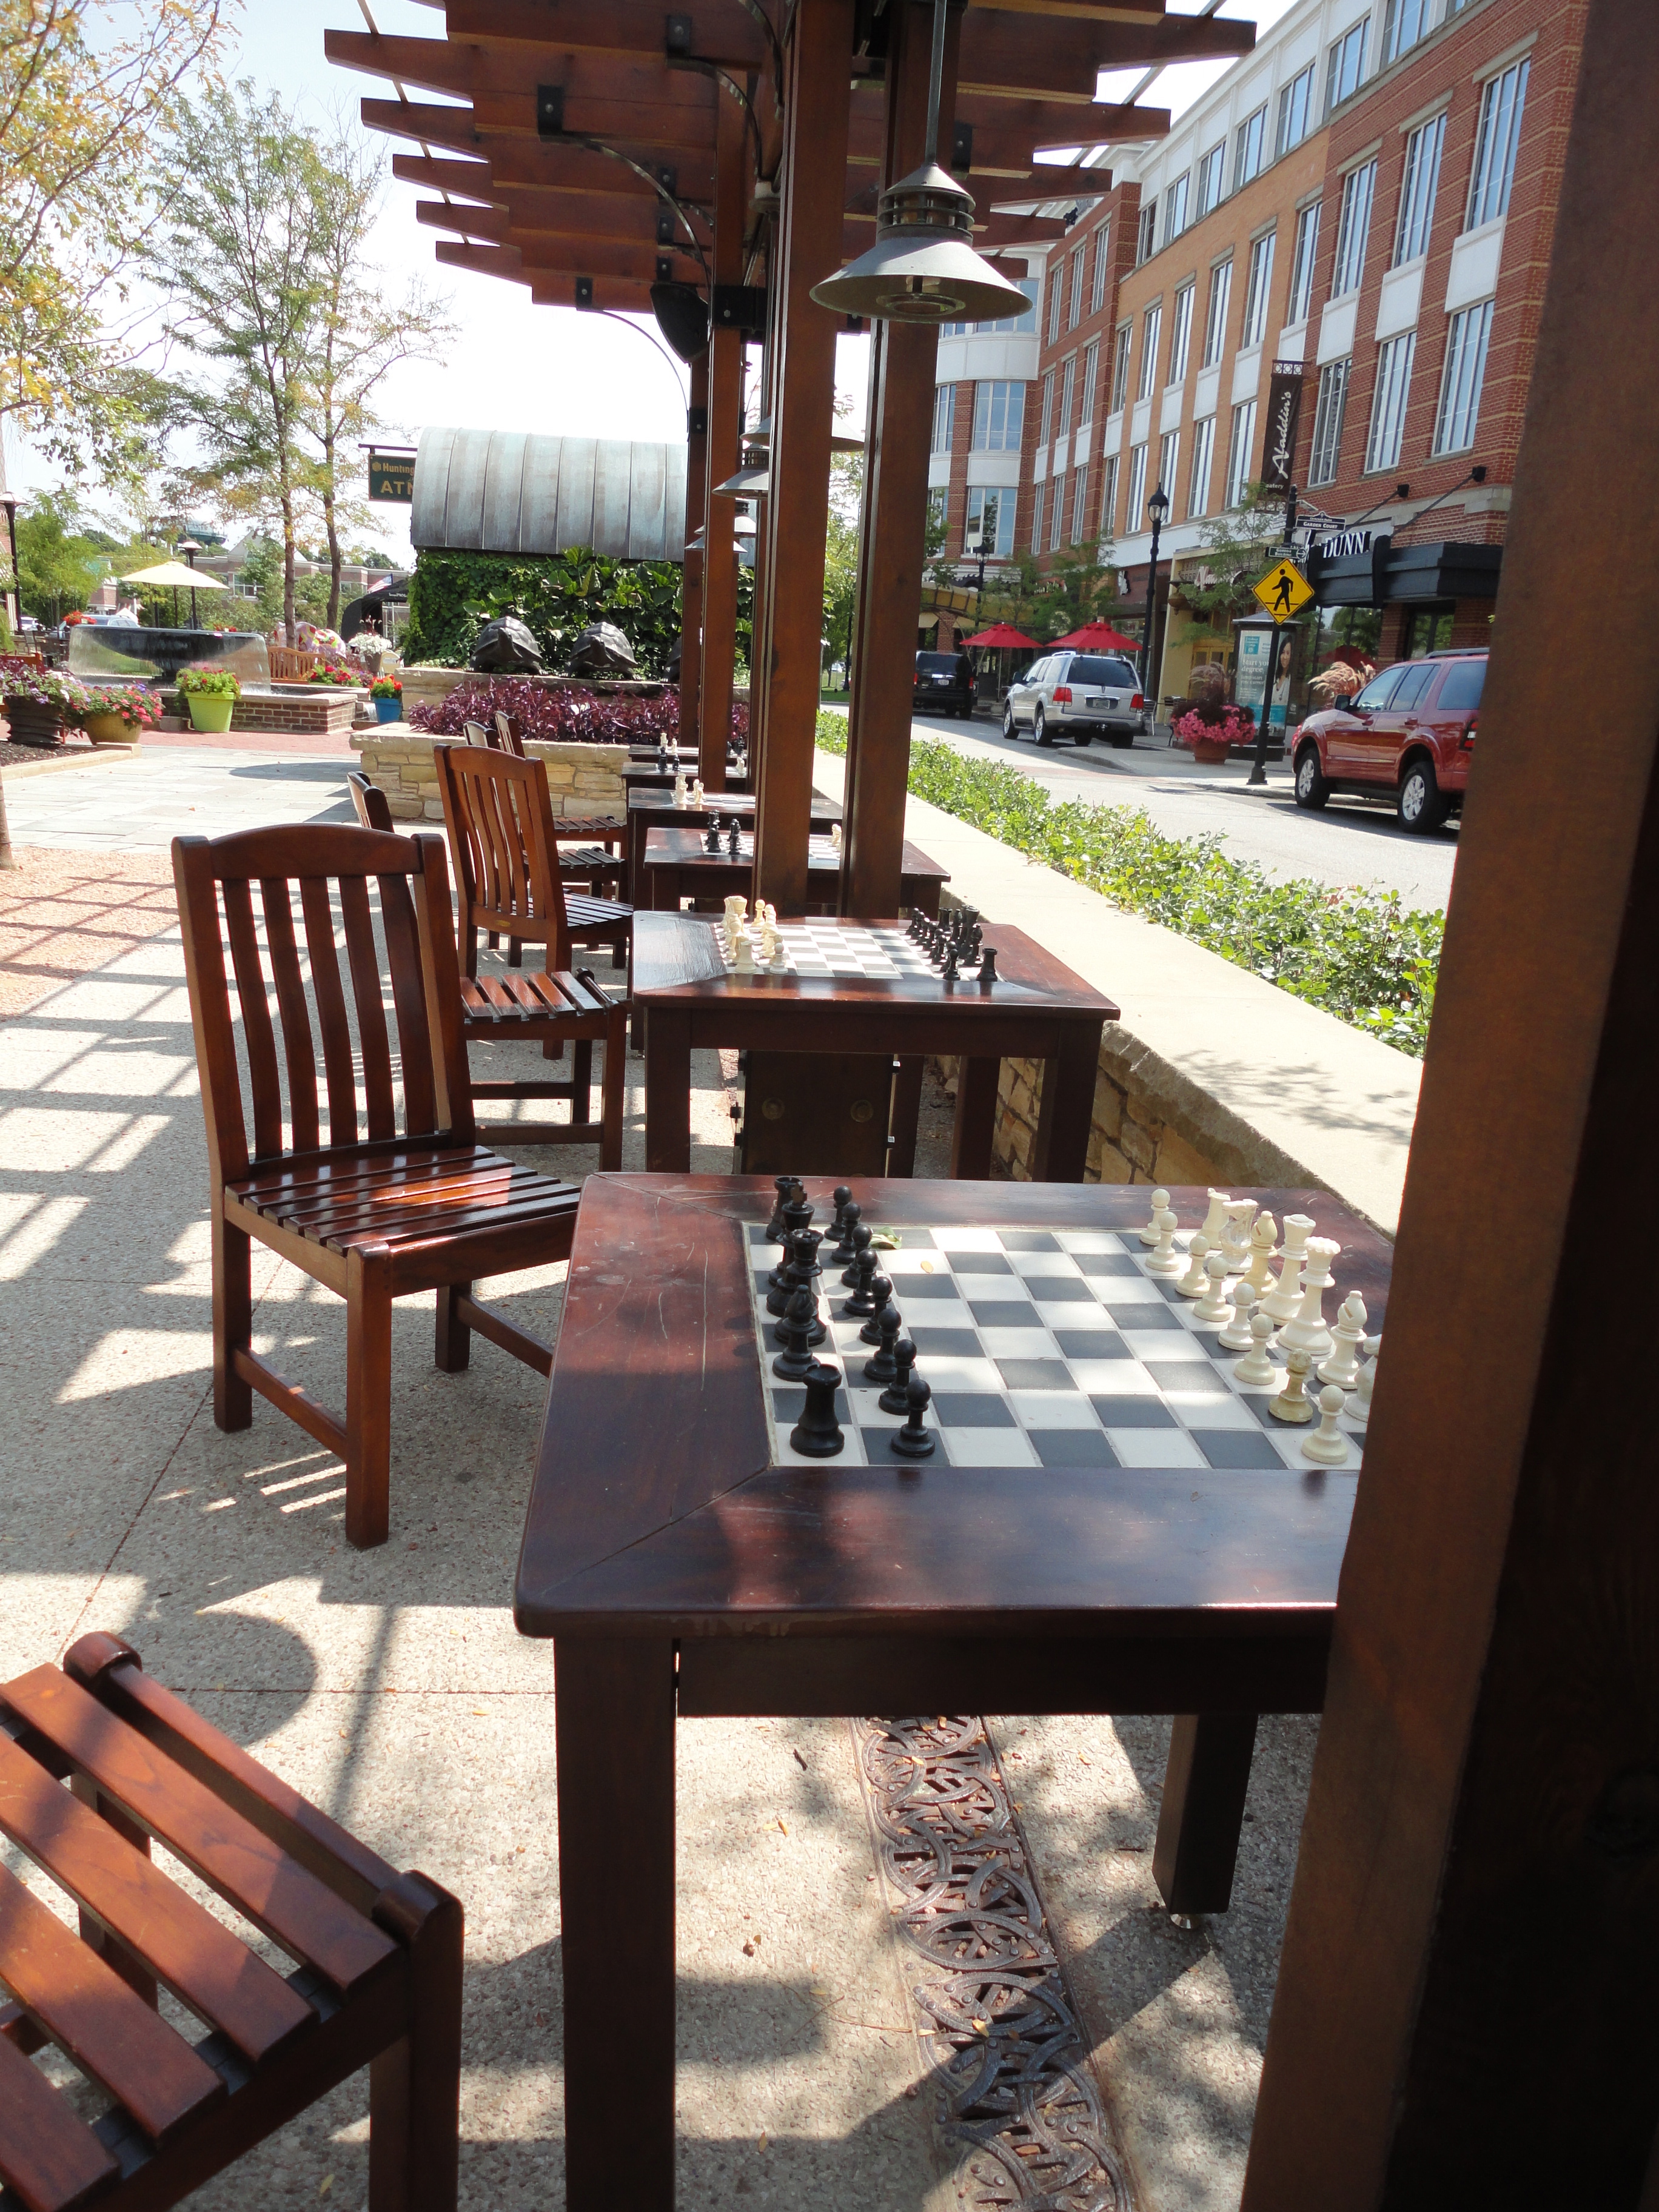 Row of chessboards